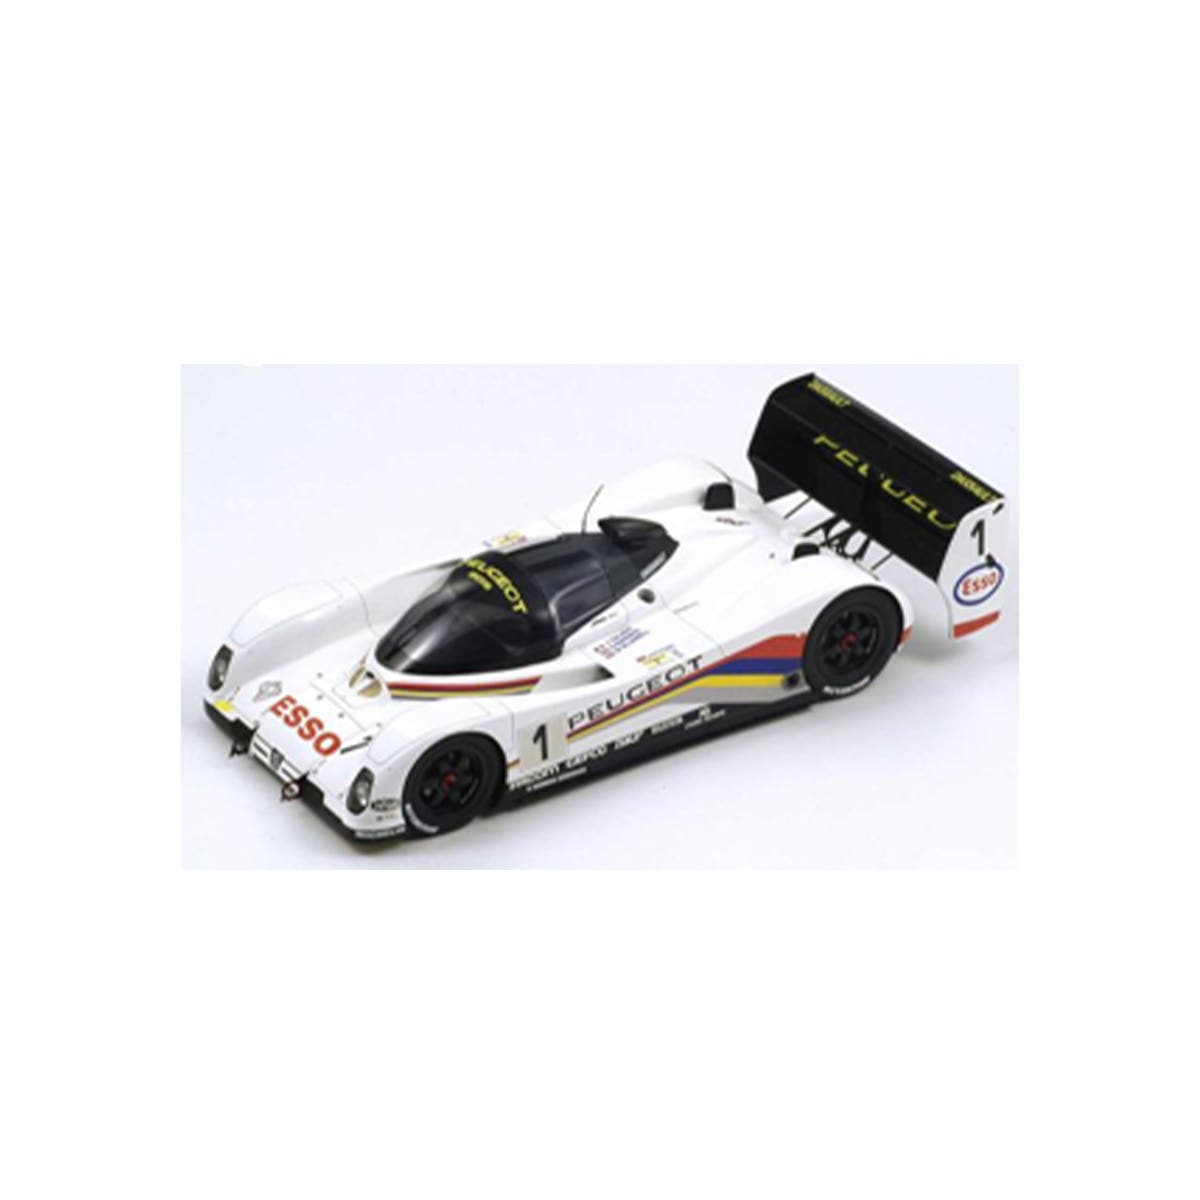 Peugeot 905 No.1 Winner 24H Le Mans 1992 - D. Warwick - Y. Dalmas - M. Blundell - With Acrylic Cover - 1:18 Scale Resin Model Car